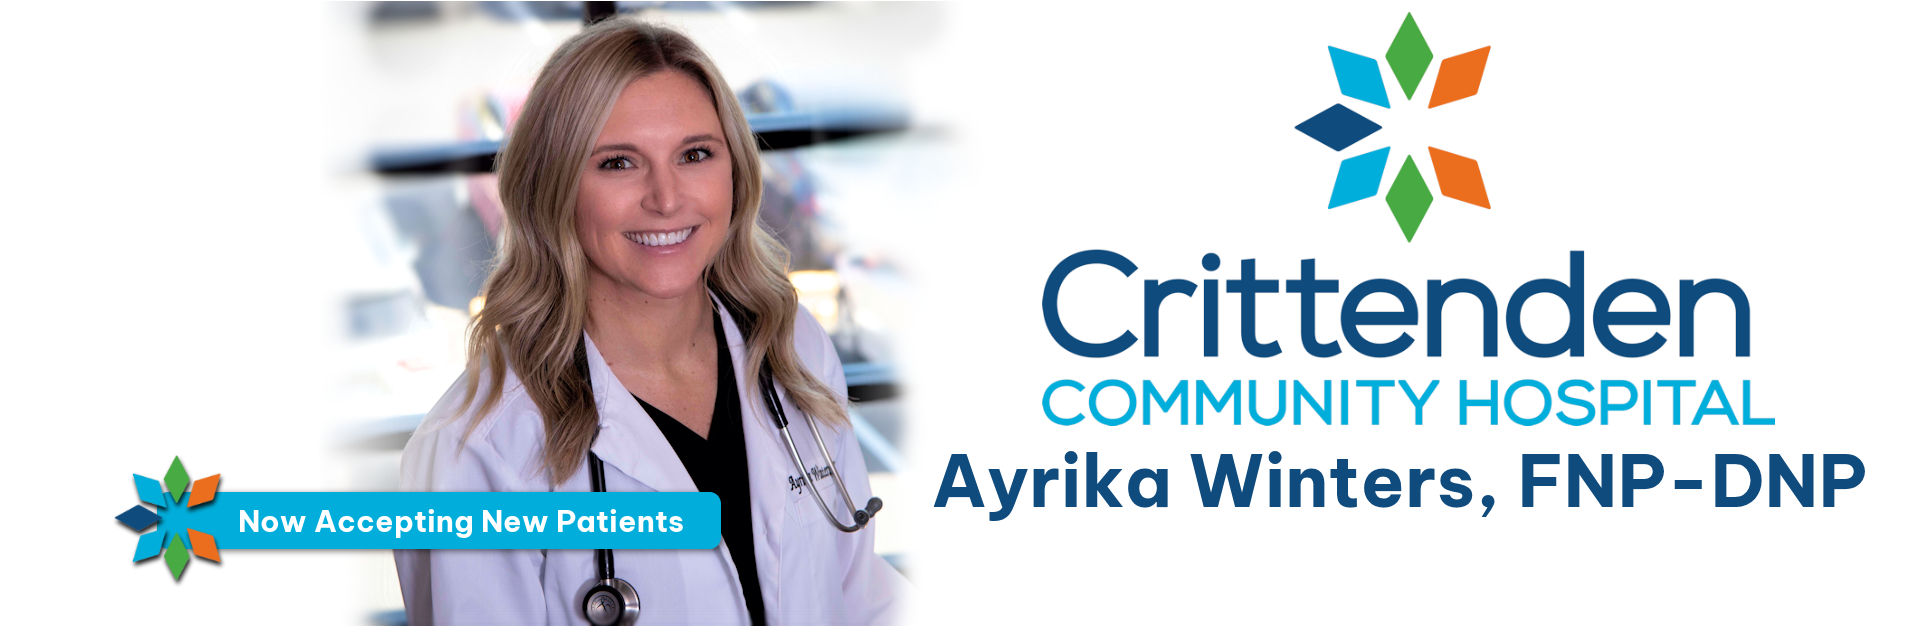 Banner picture of a Ayrika Winters, FNP-DNP
Family Nurse Practitioner 


Banner says:
Meet our New Nurse Practitioner